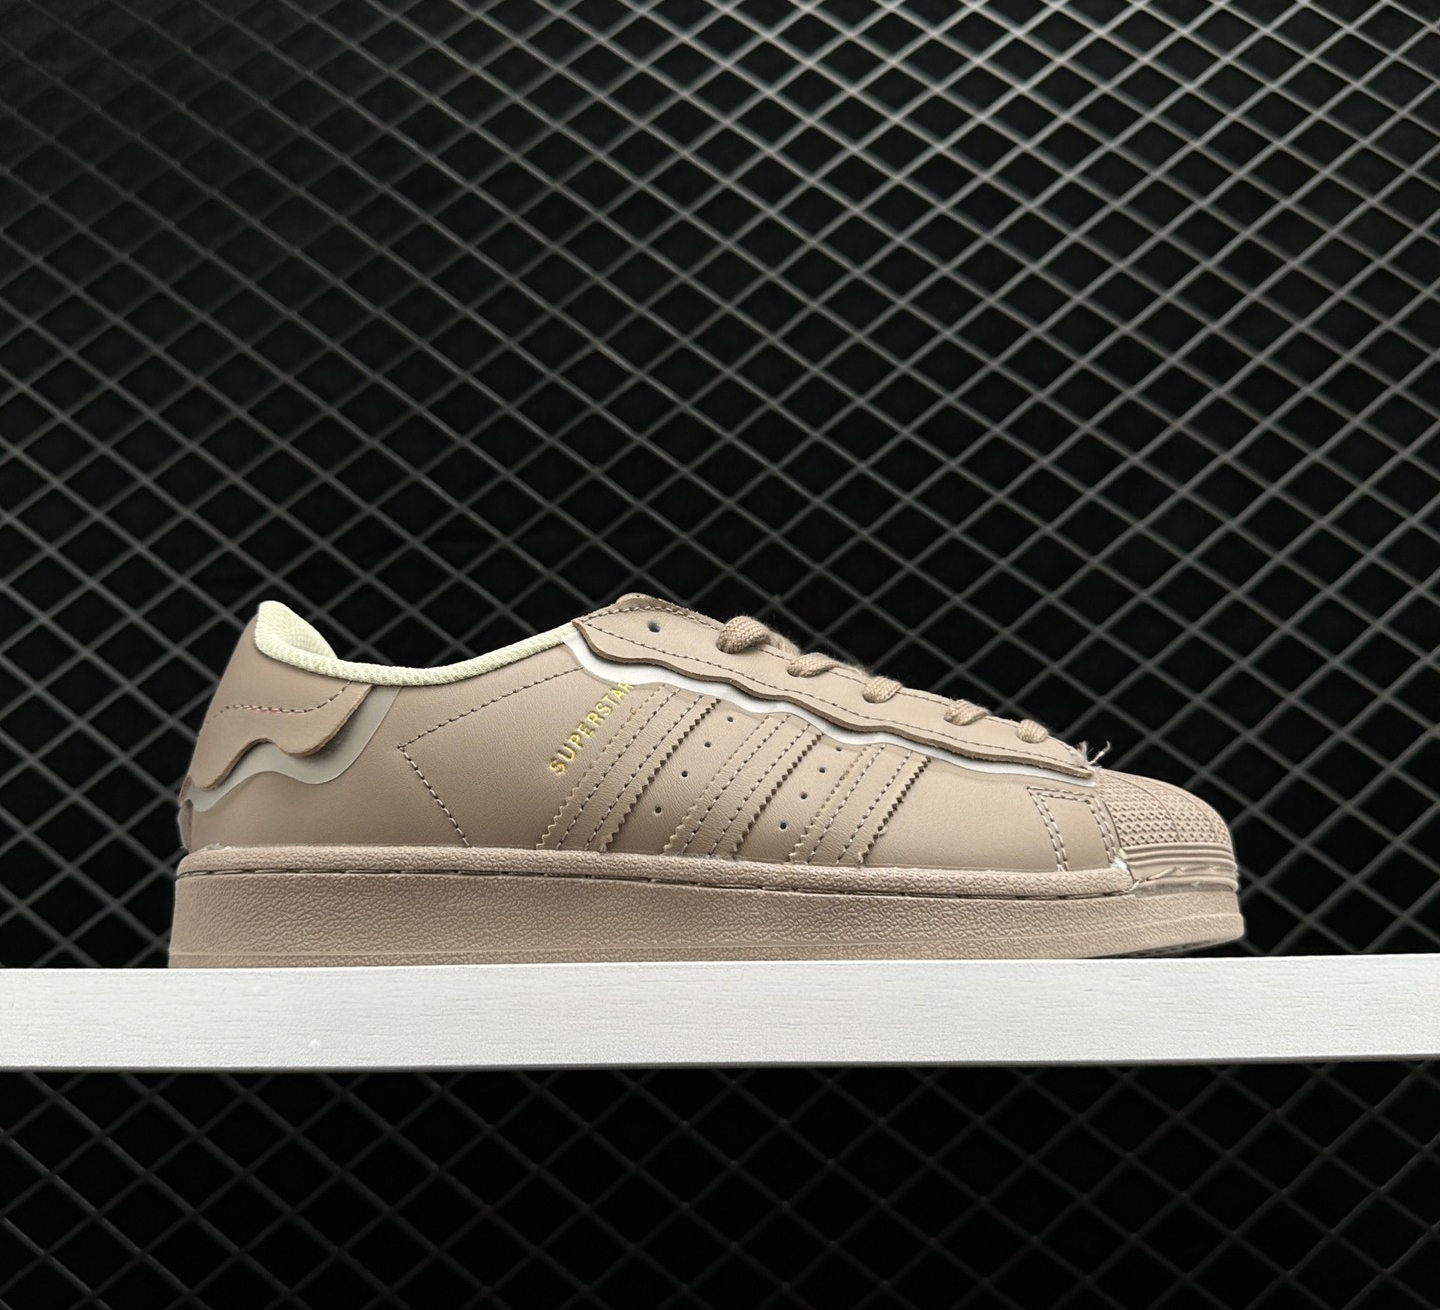 Adidas Originals Superstar Light Gray Brown GW4440 - Stylish and Comfortable Sneakers